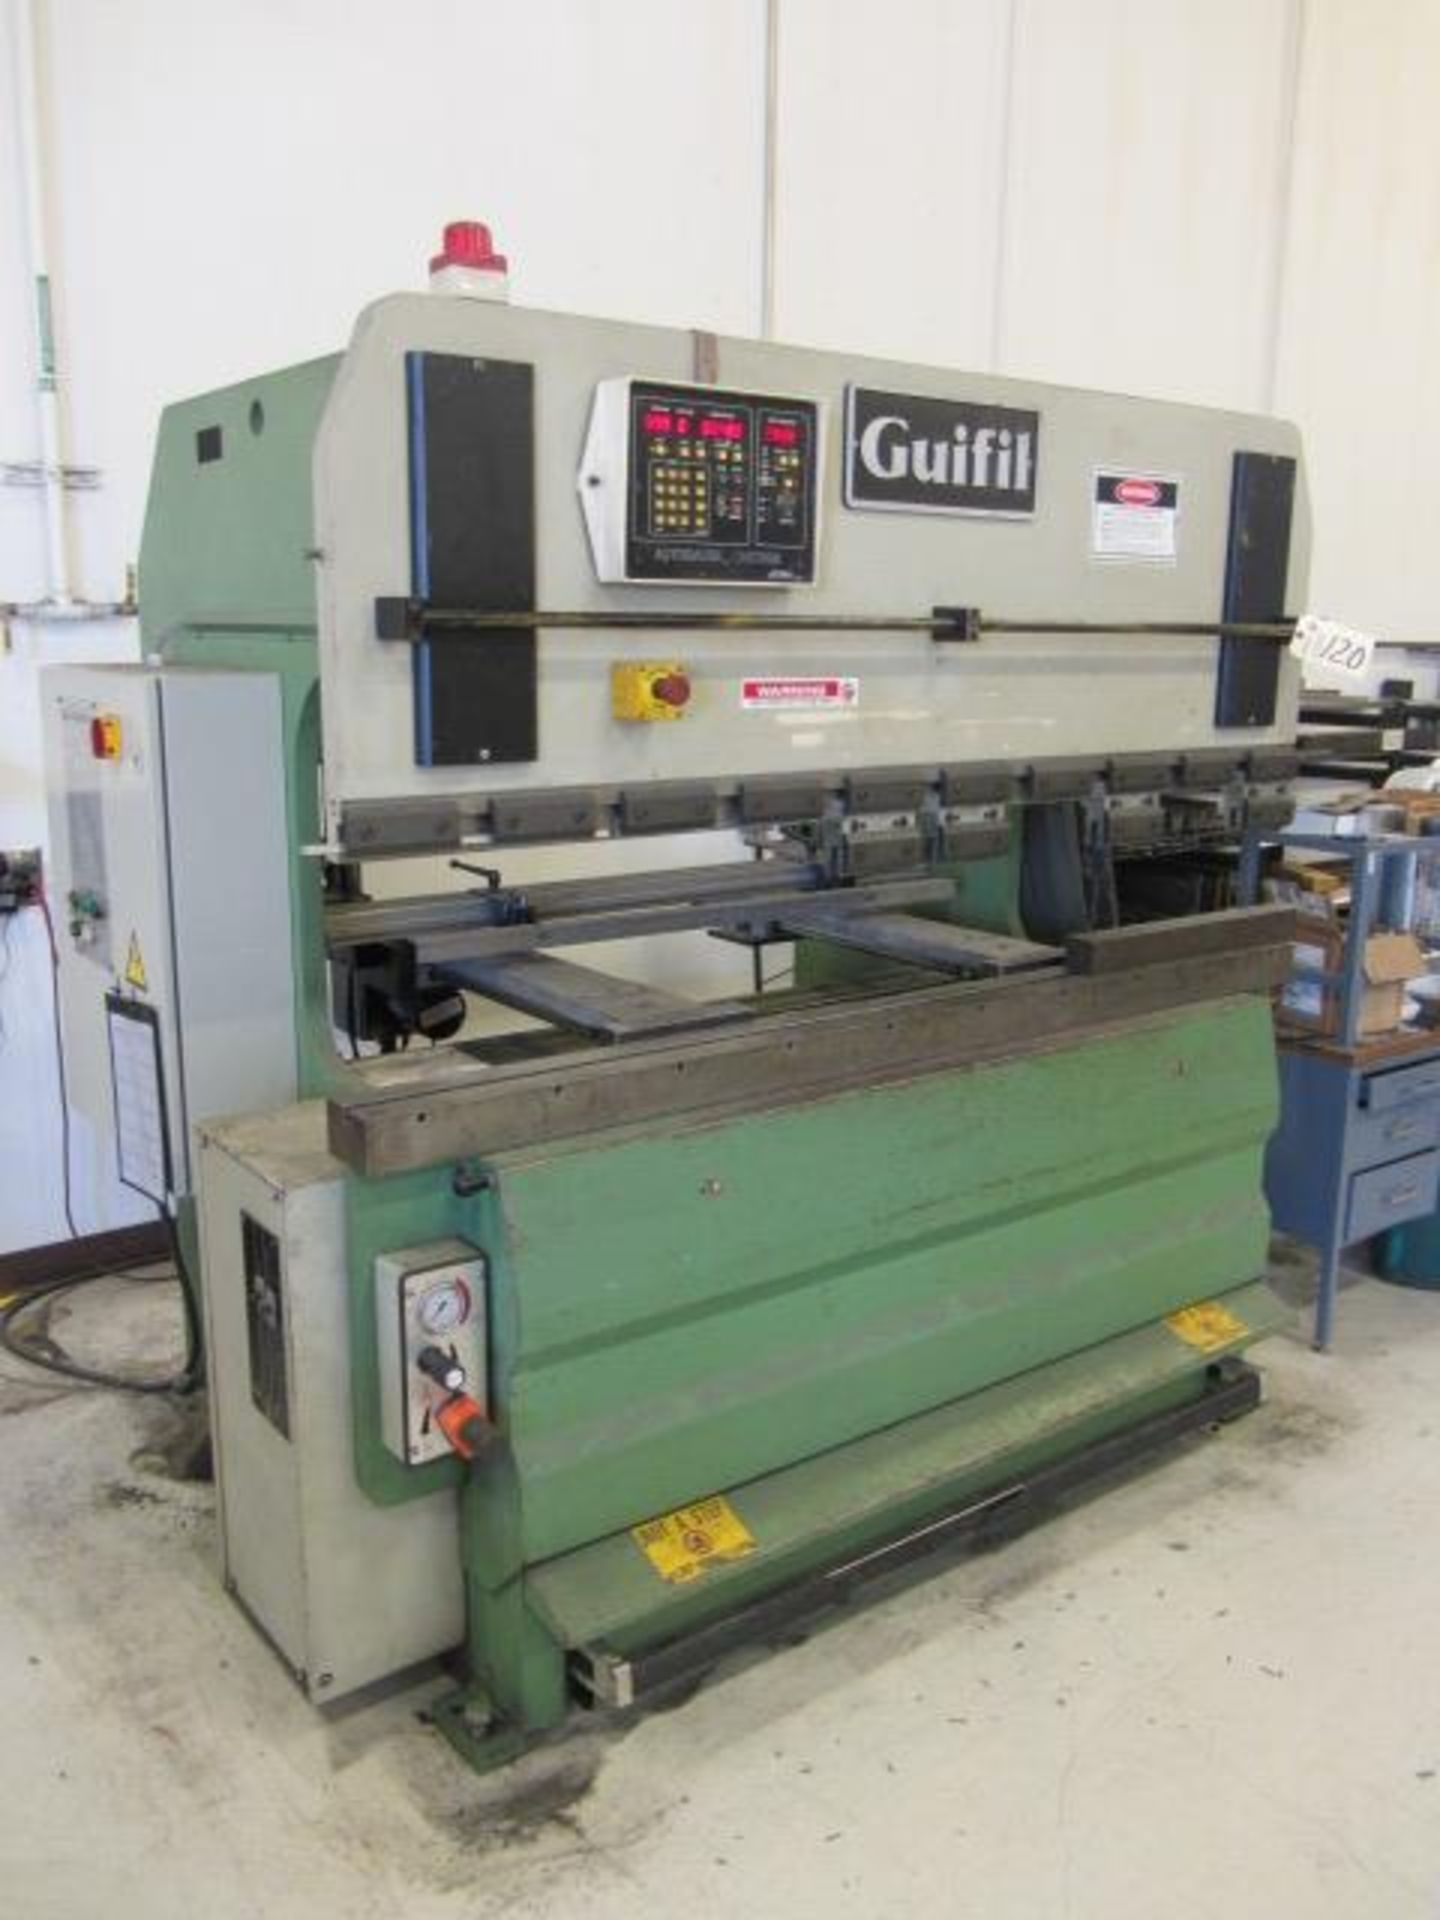 Guifil Model PE20-63 69 Ton x 76' Hydraulic Press Brake with Autogauge CNC 1000 Control, 2-Axis - Image 4 of 11